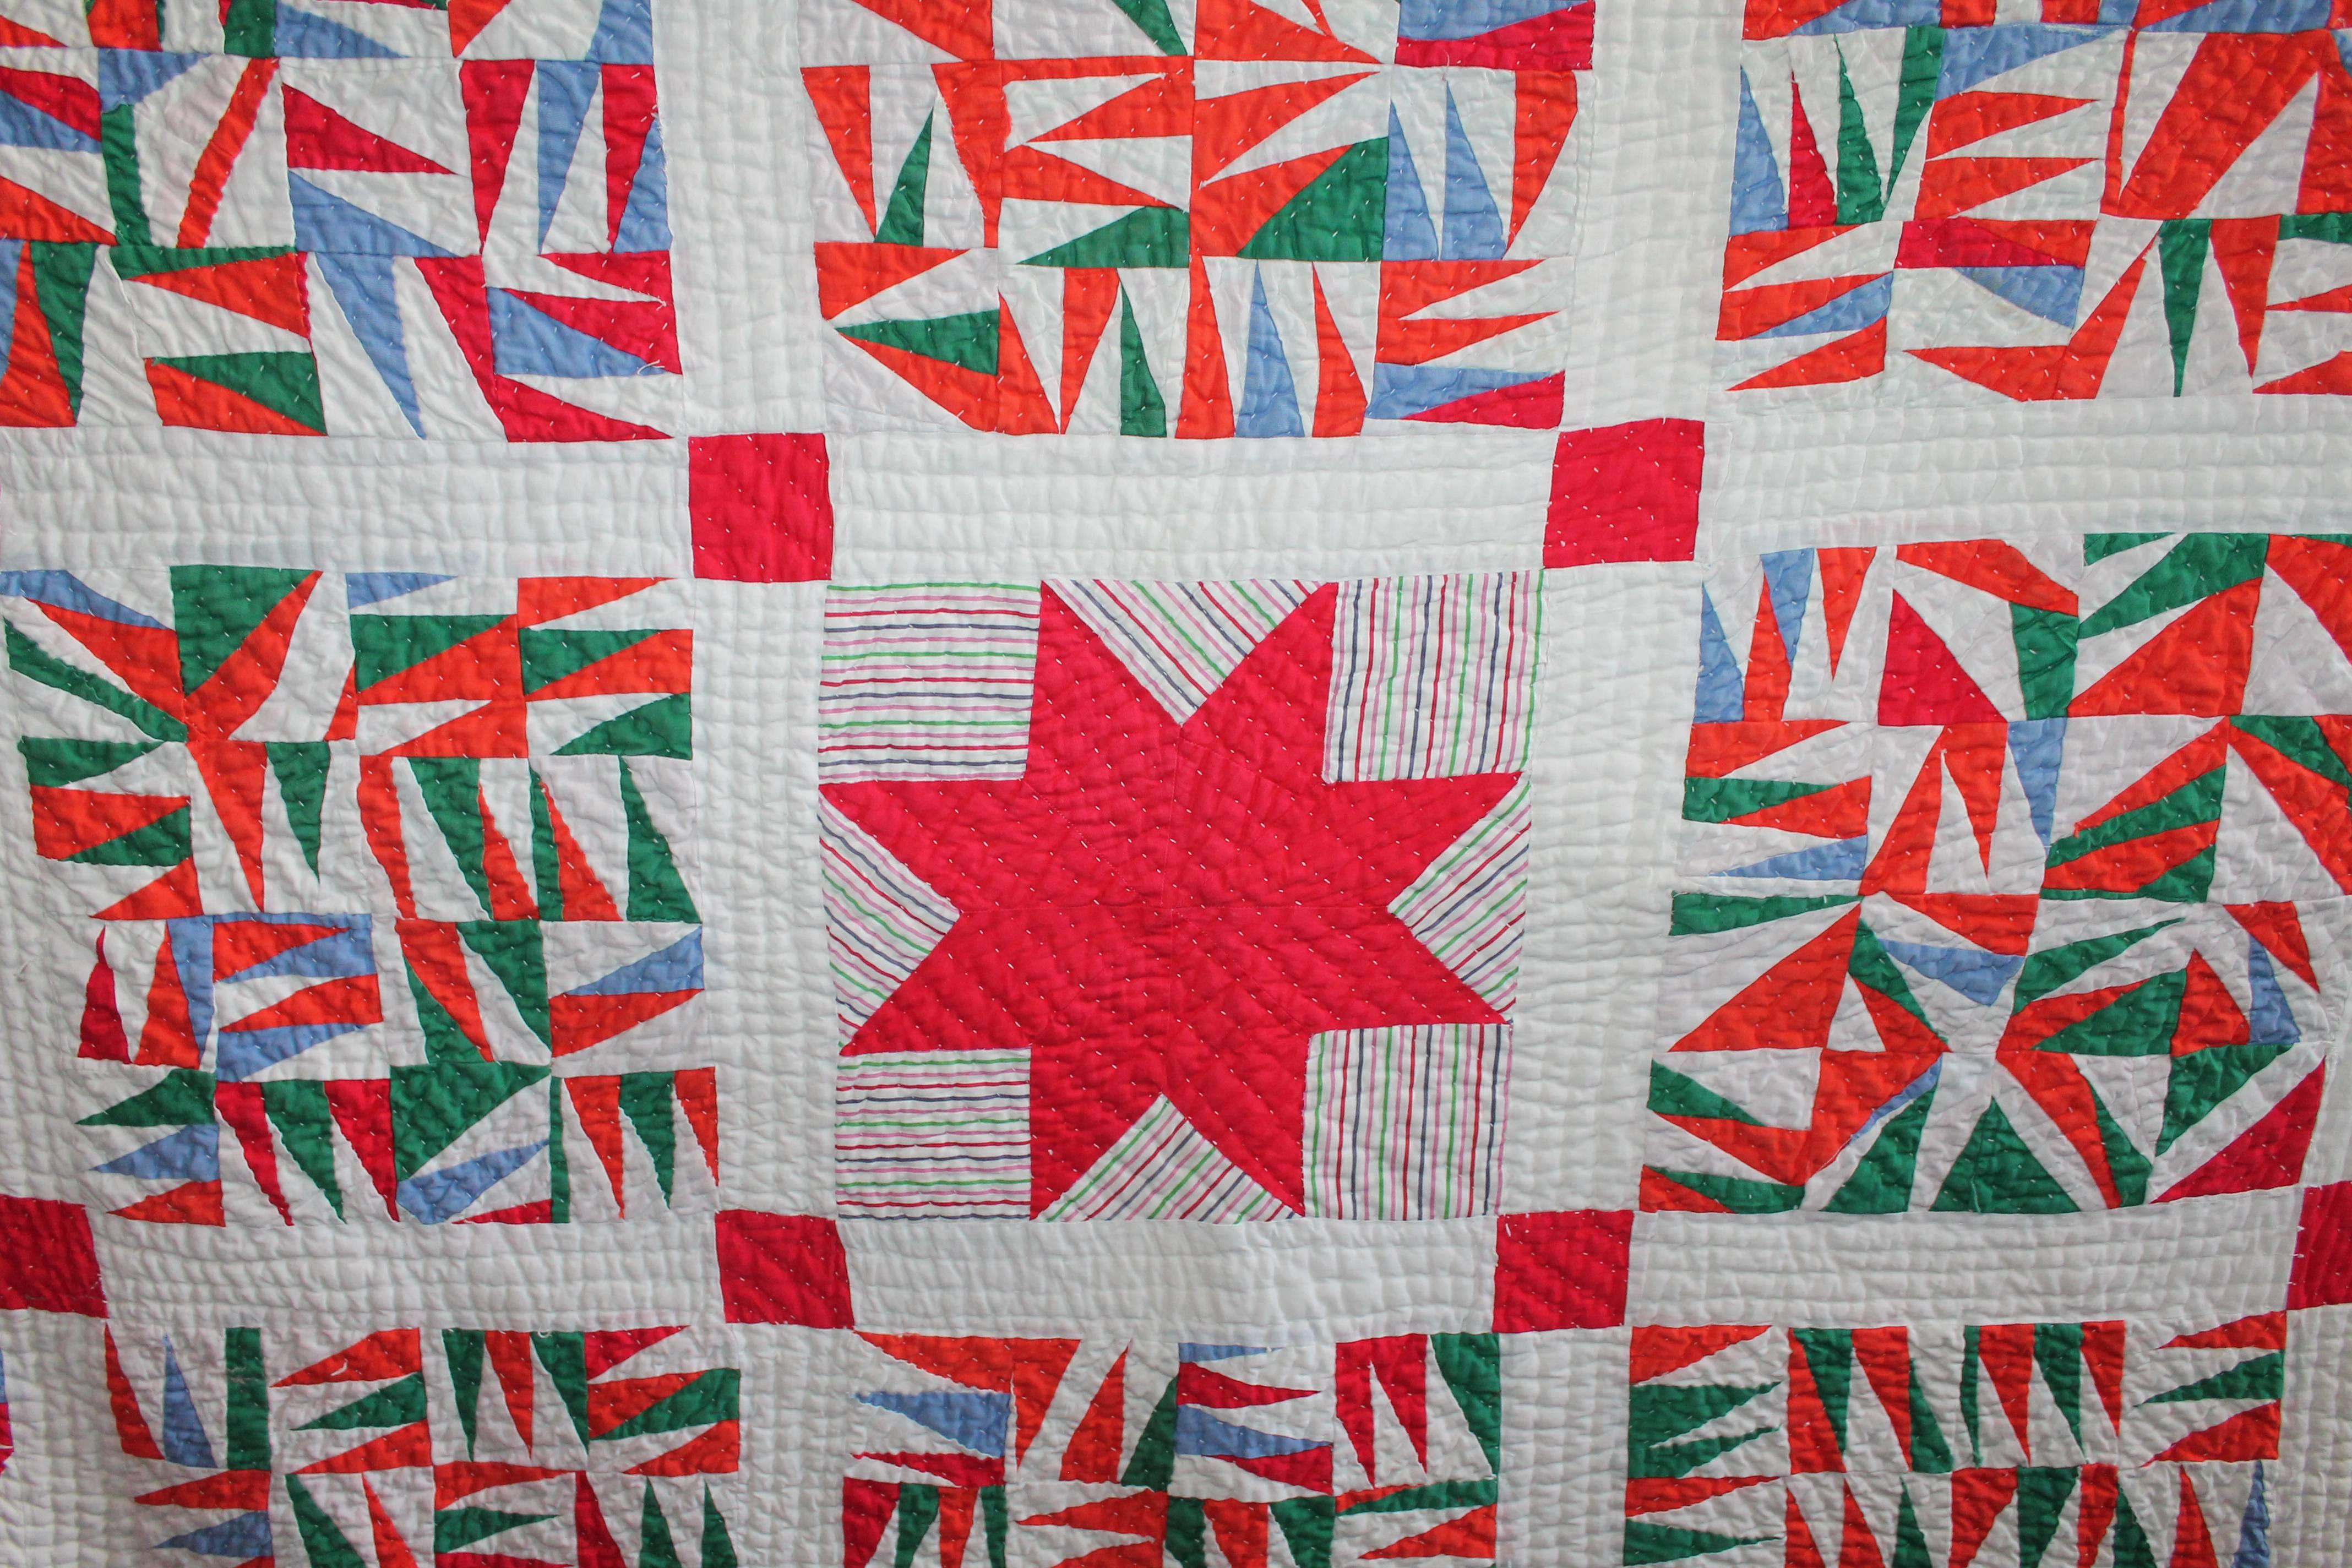 American Folky Mini-Pieced Crazy Quilt